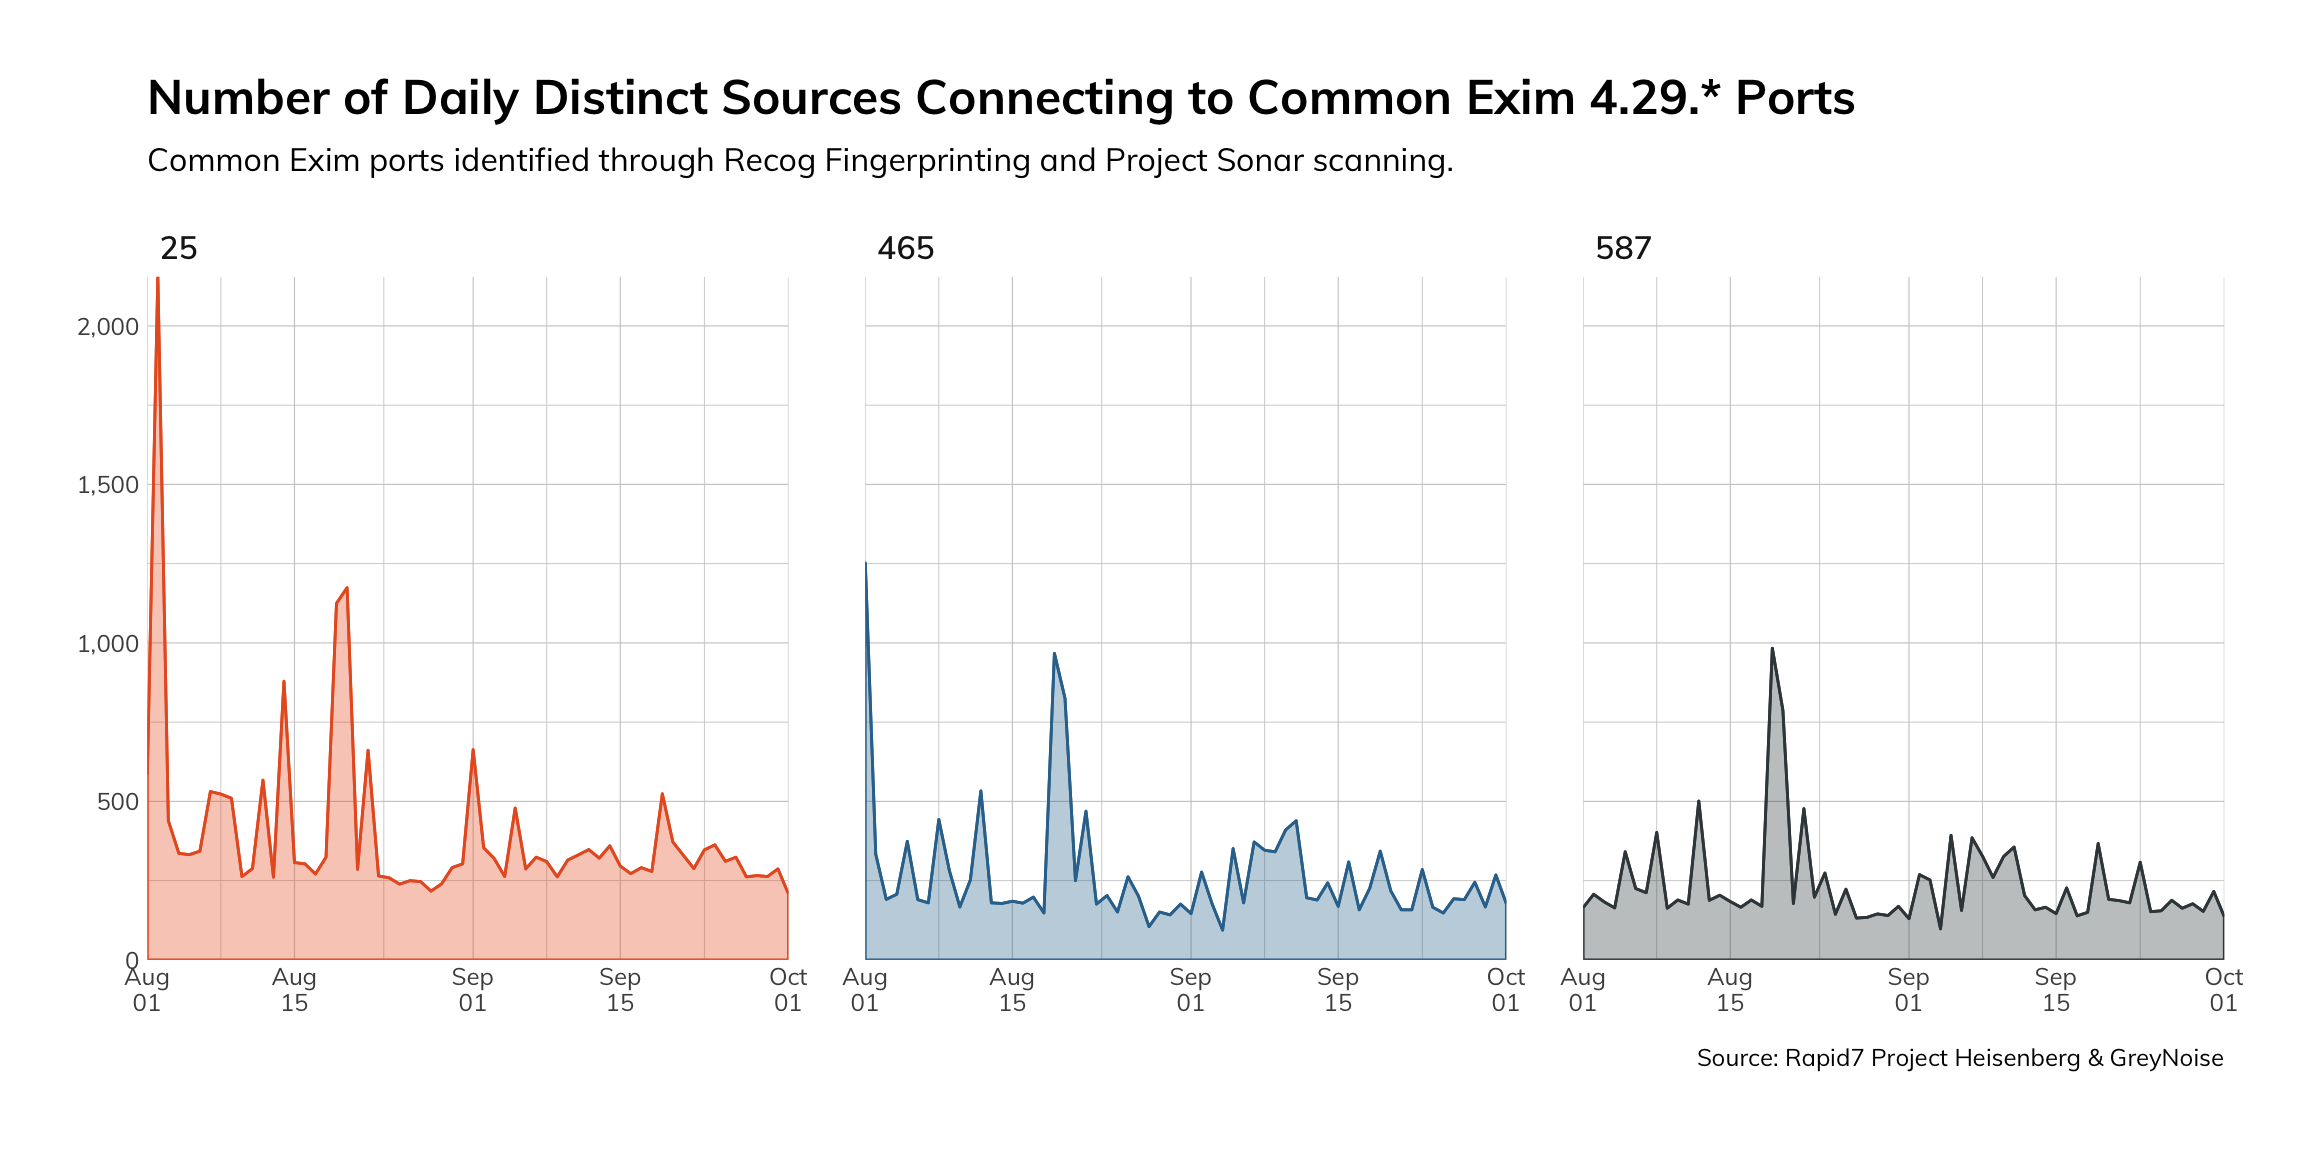 Number of daily connections to common Exim ports from potential malicious actors